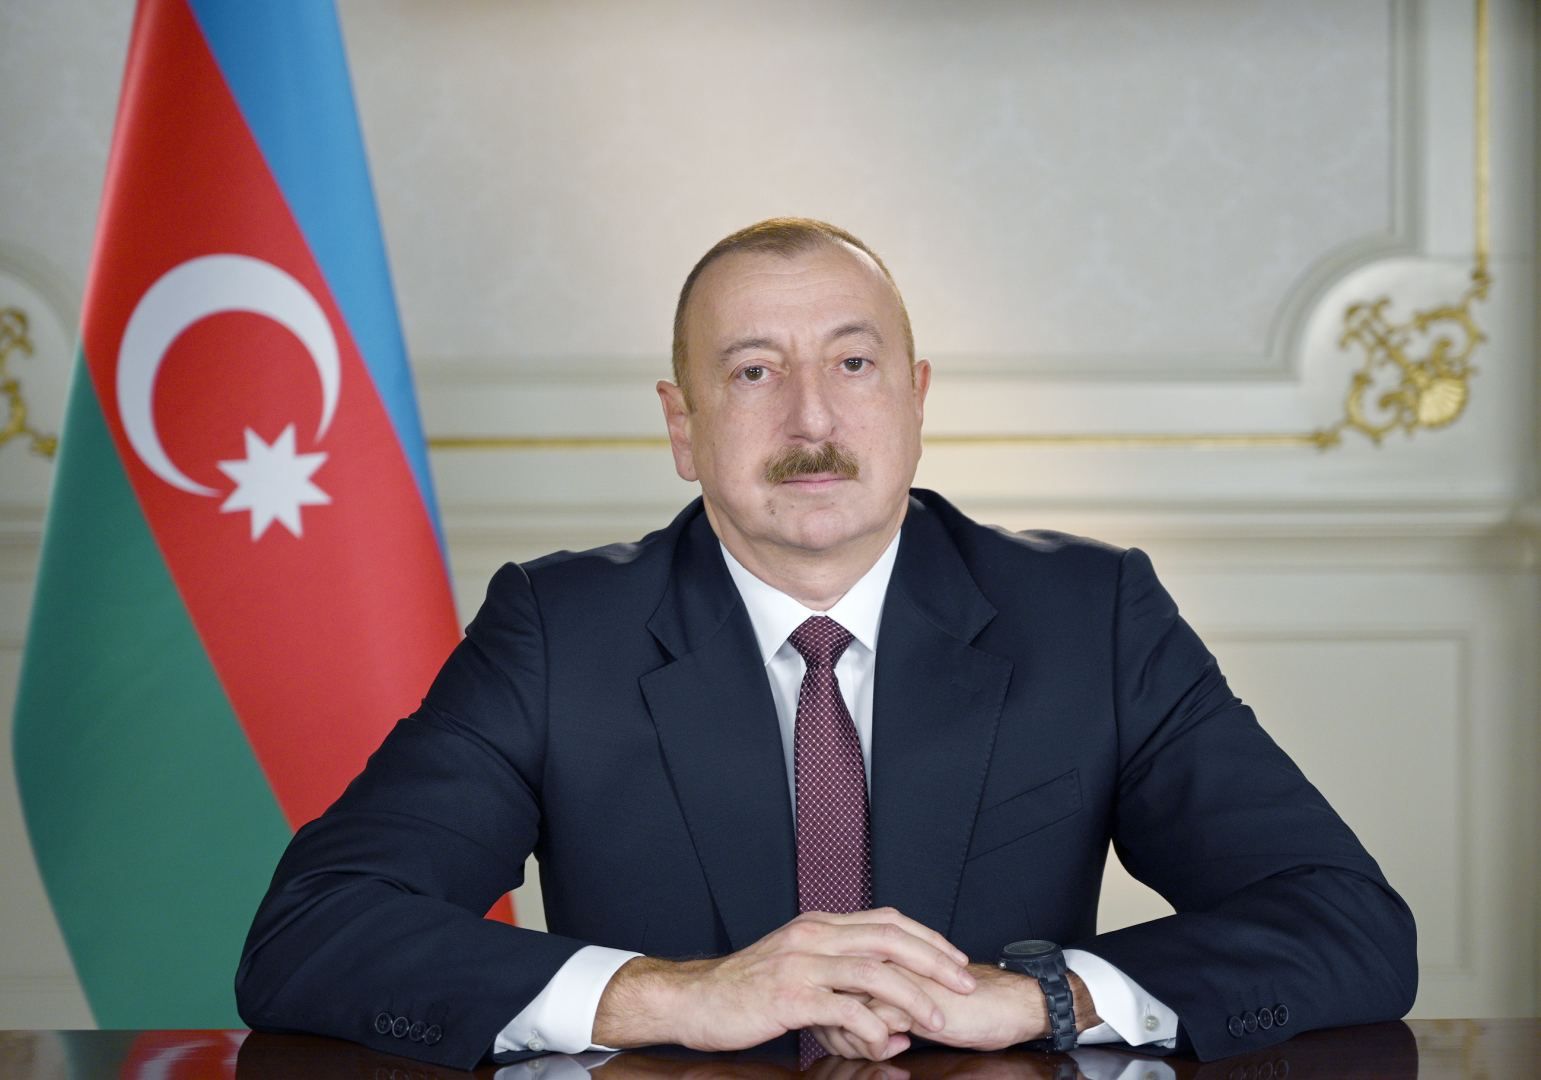 Ilham Aliyev's candidacy for early presidential election approved